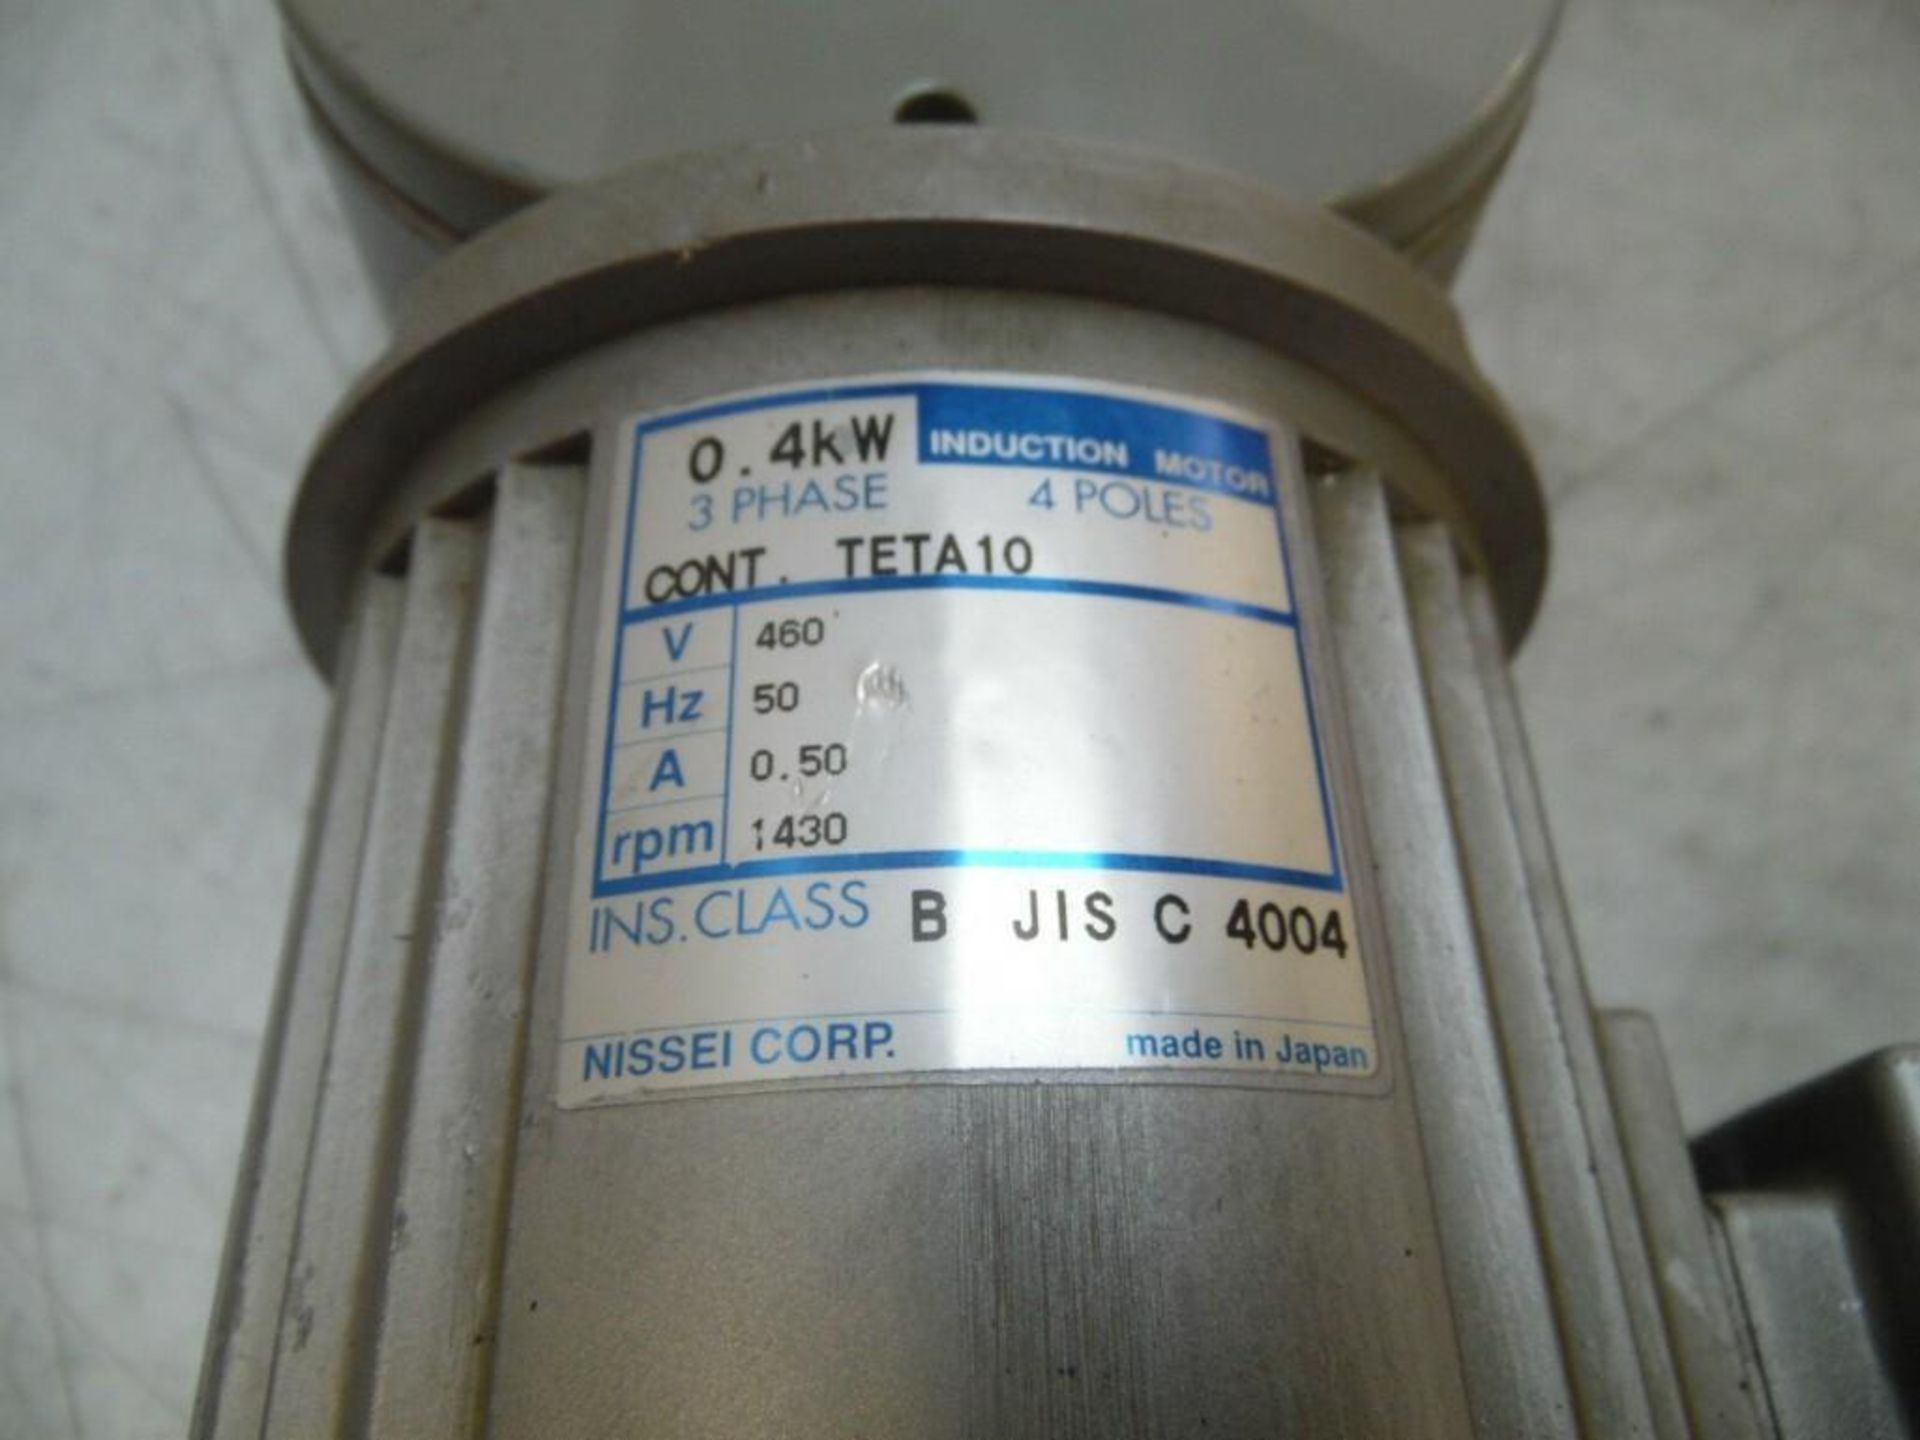 Lot of (2) GTR Induction Geared Motor, FSM-30-100-T020WA, 0.4 kW, Ratio 1:100 - Image 2 of 4